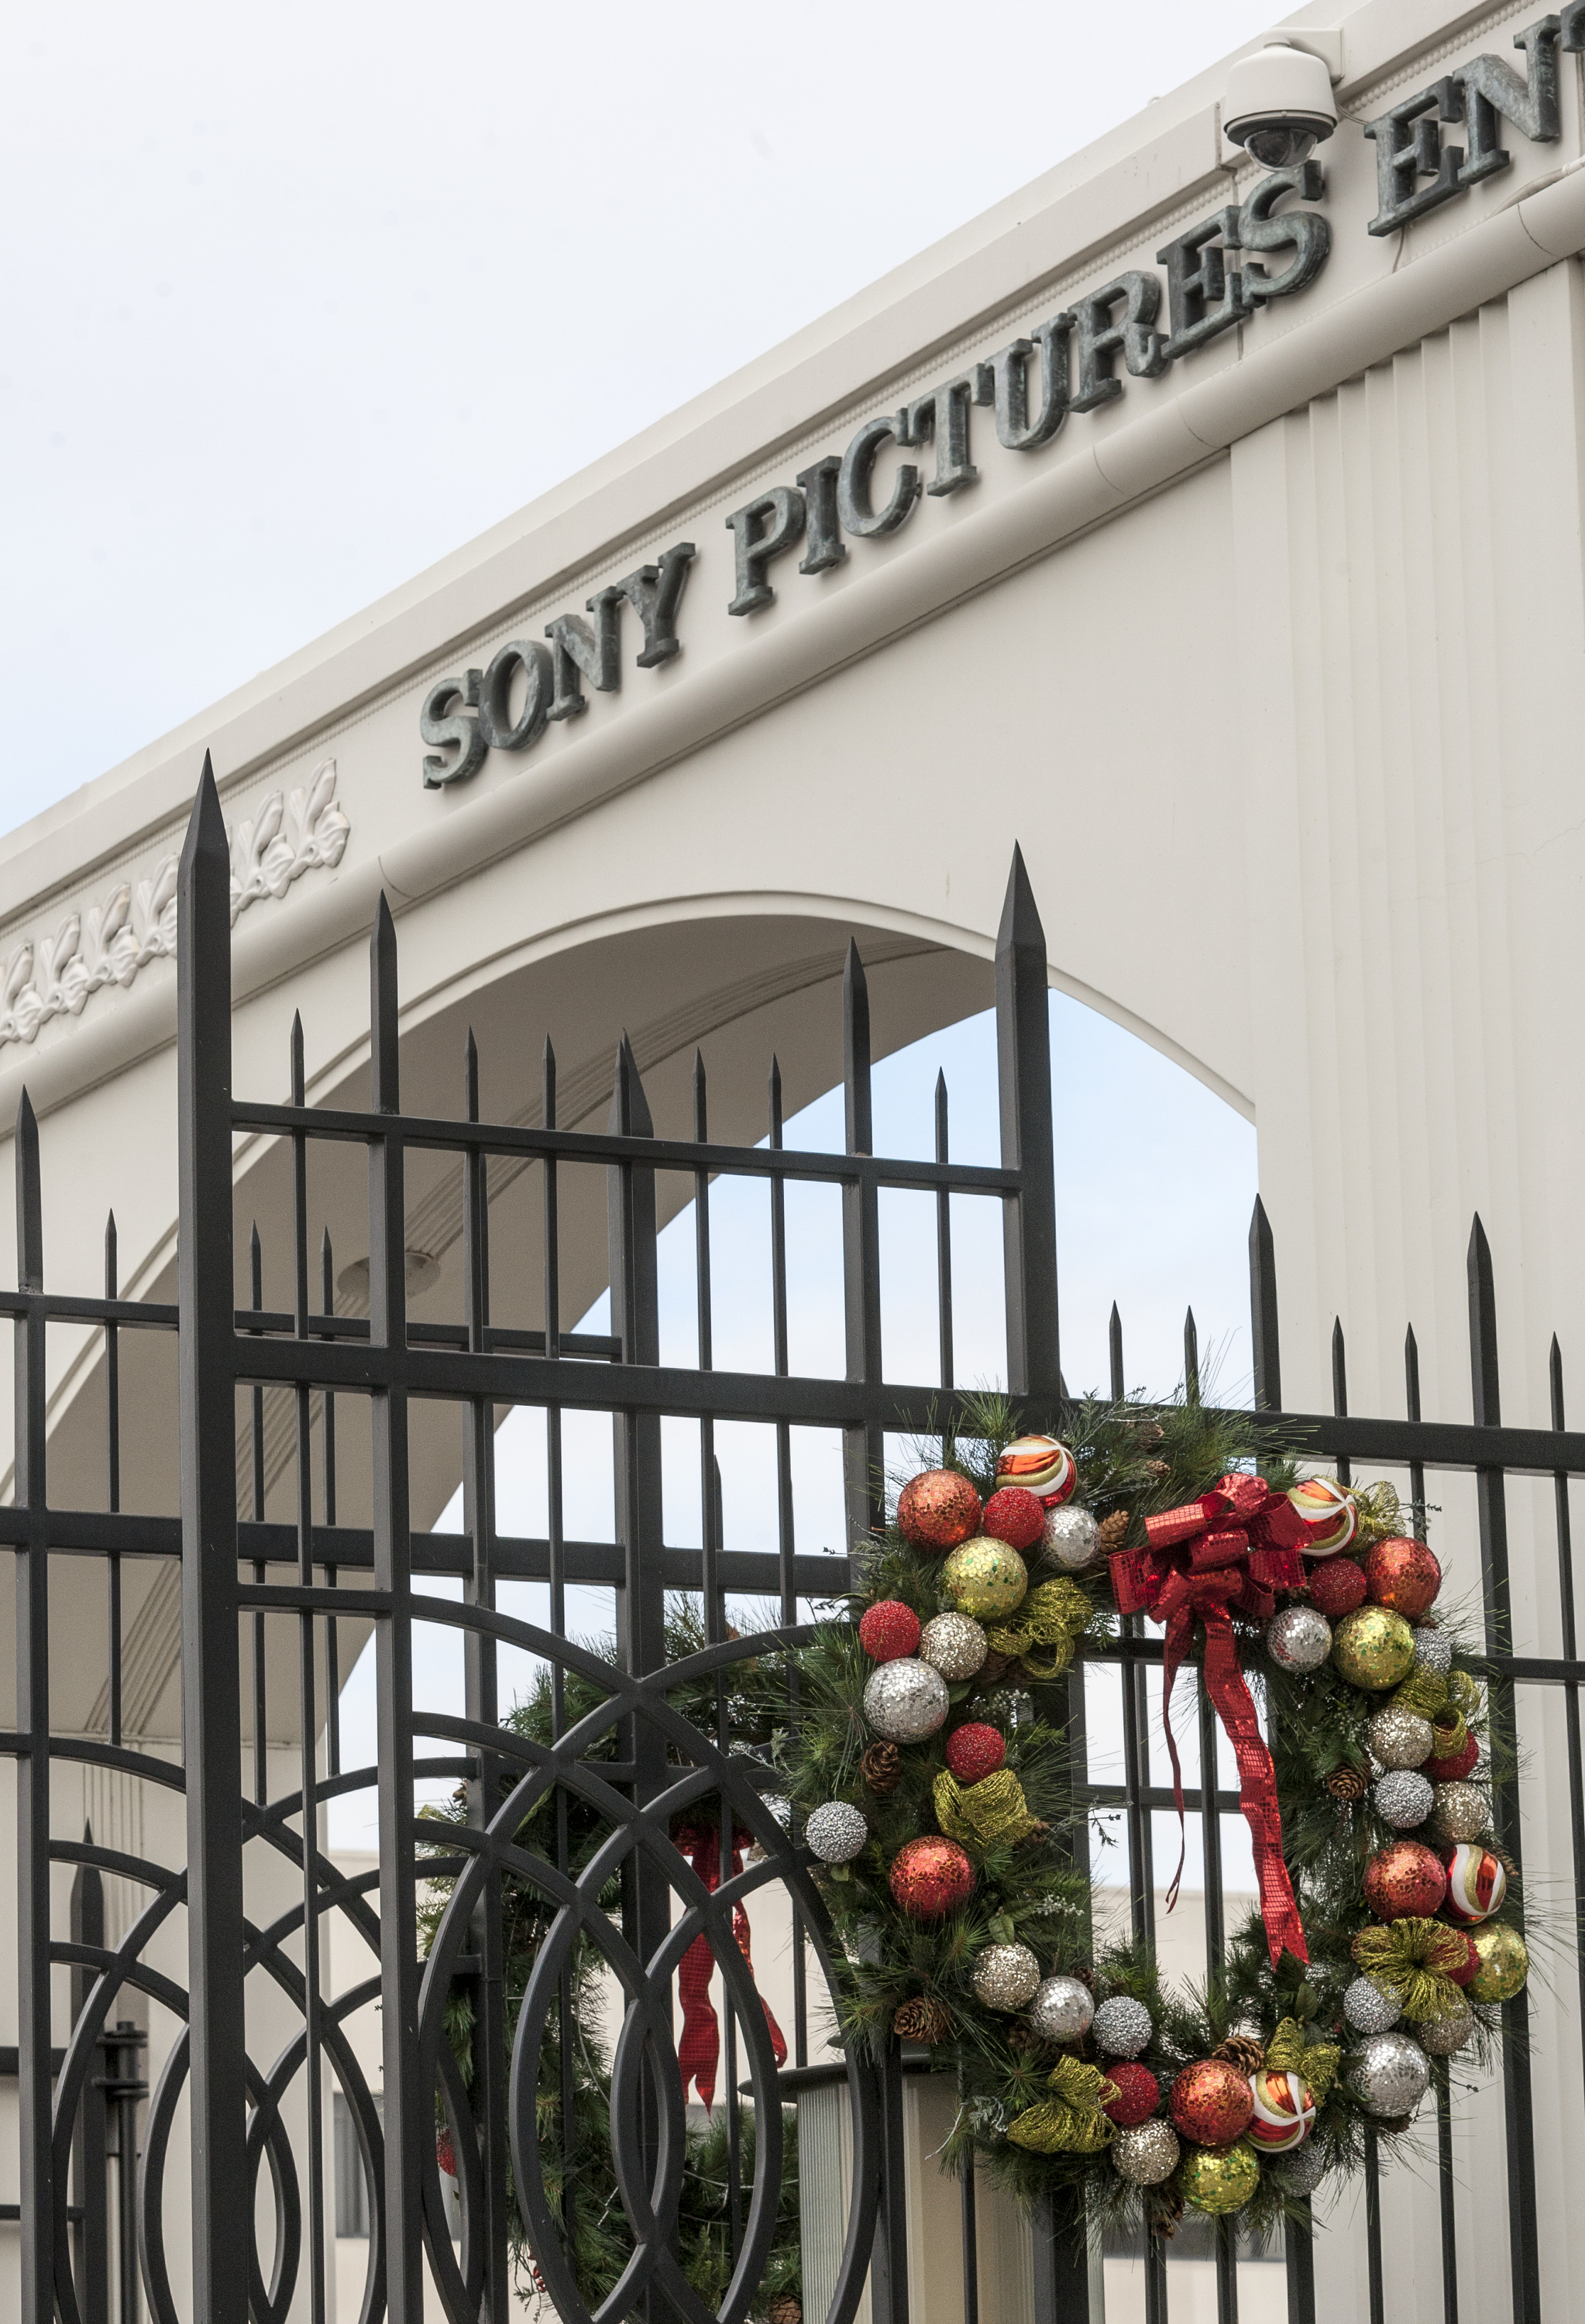 Holiday decorations at Sony Pictures Studios in Culver City